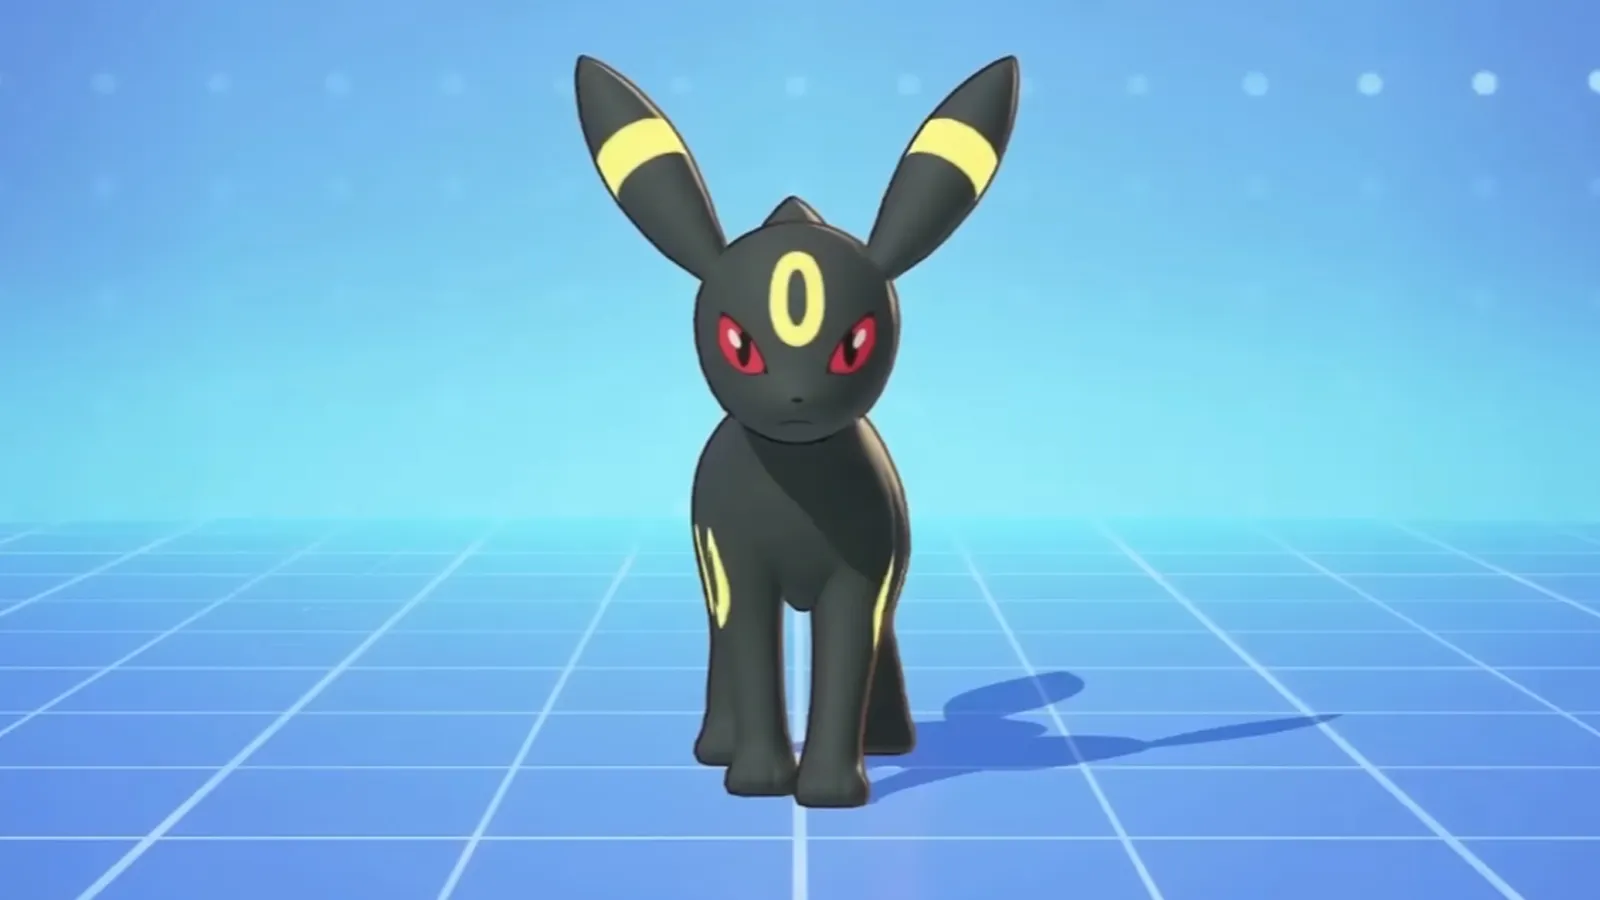 Pokémon Unite: Umbreon release date, Battle Type, and cost - Dot Esports